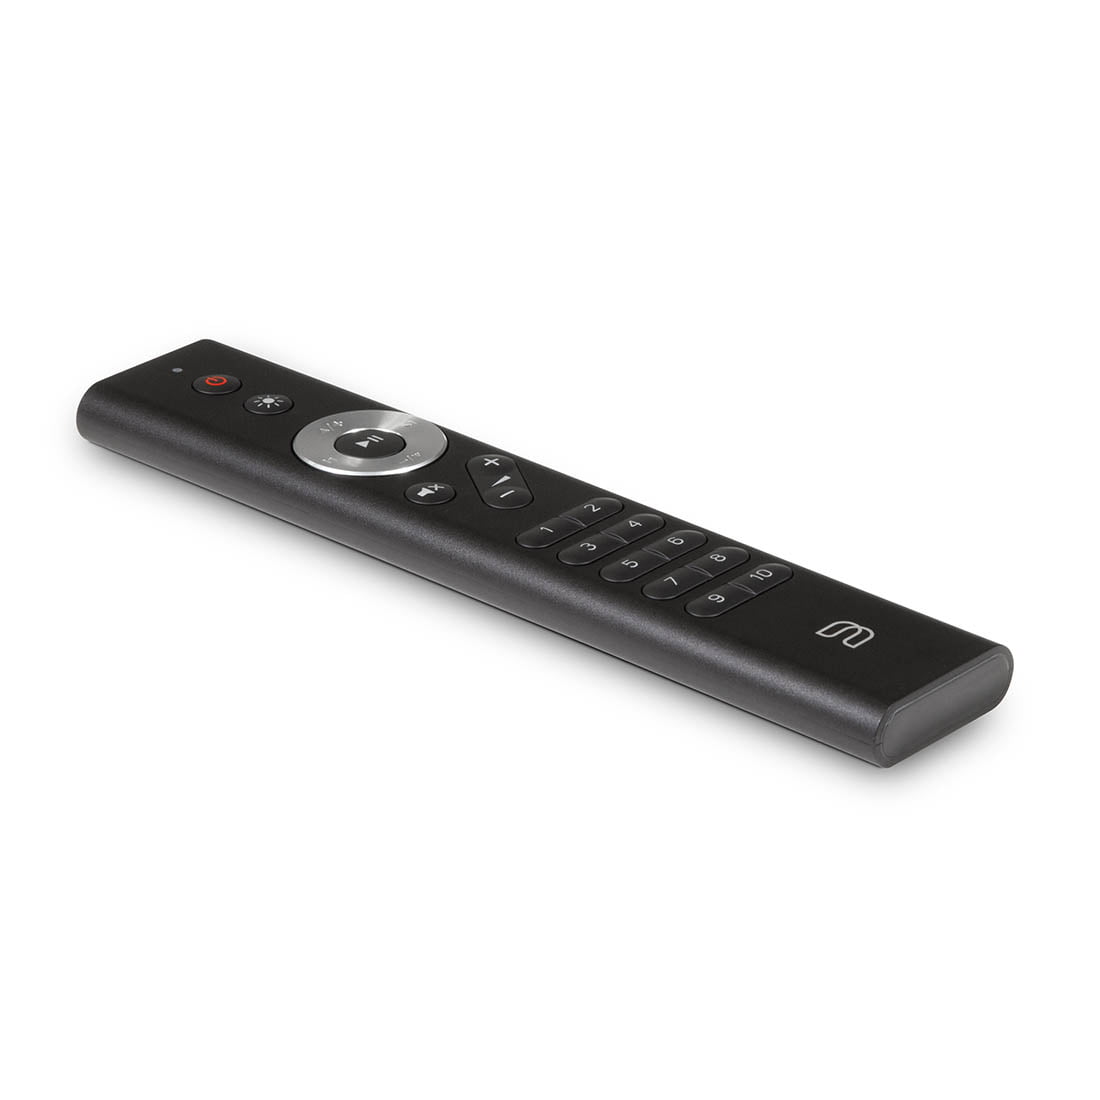 Bluesound RC1 Remote Control for Bluesound Players